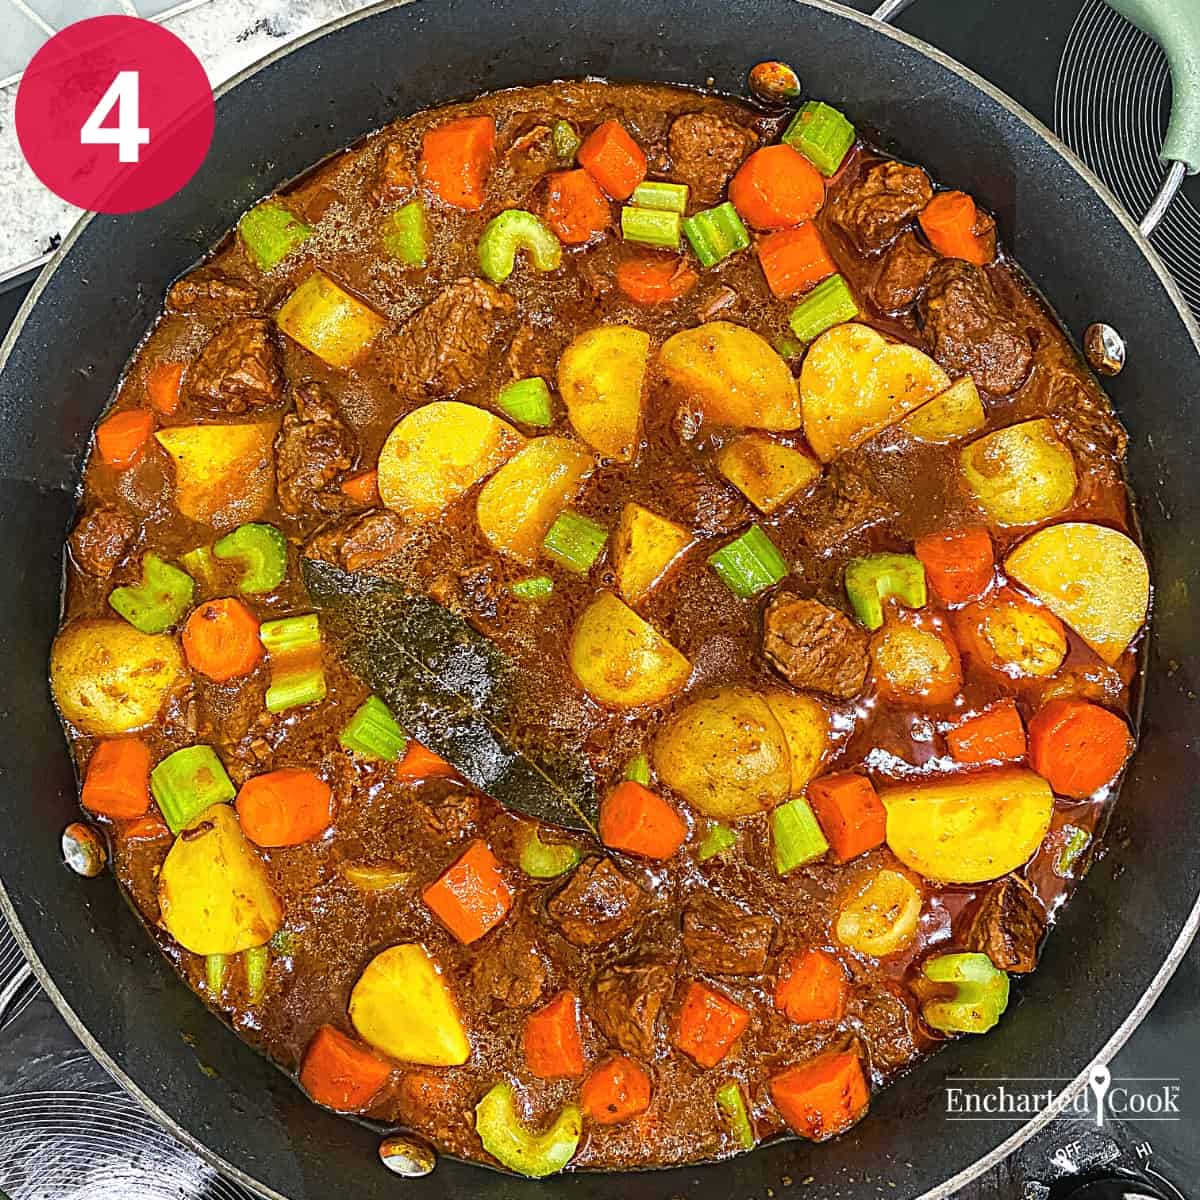 Process Photo 4 - Cut carrots, potatoes, and celery are added in stages to the beef stew.